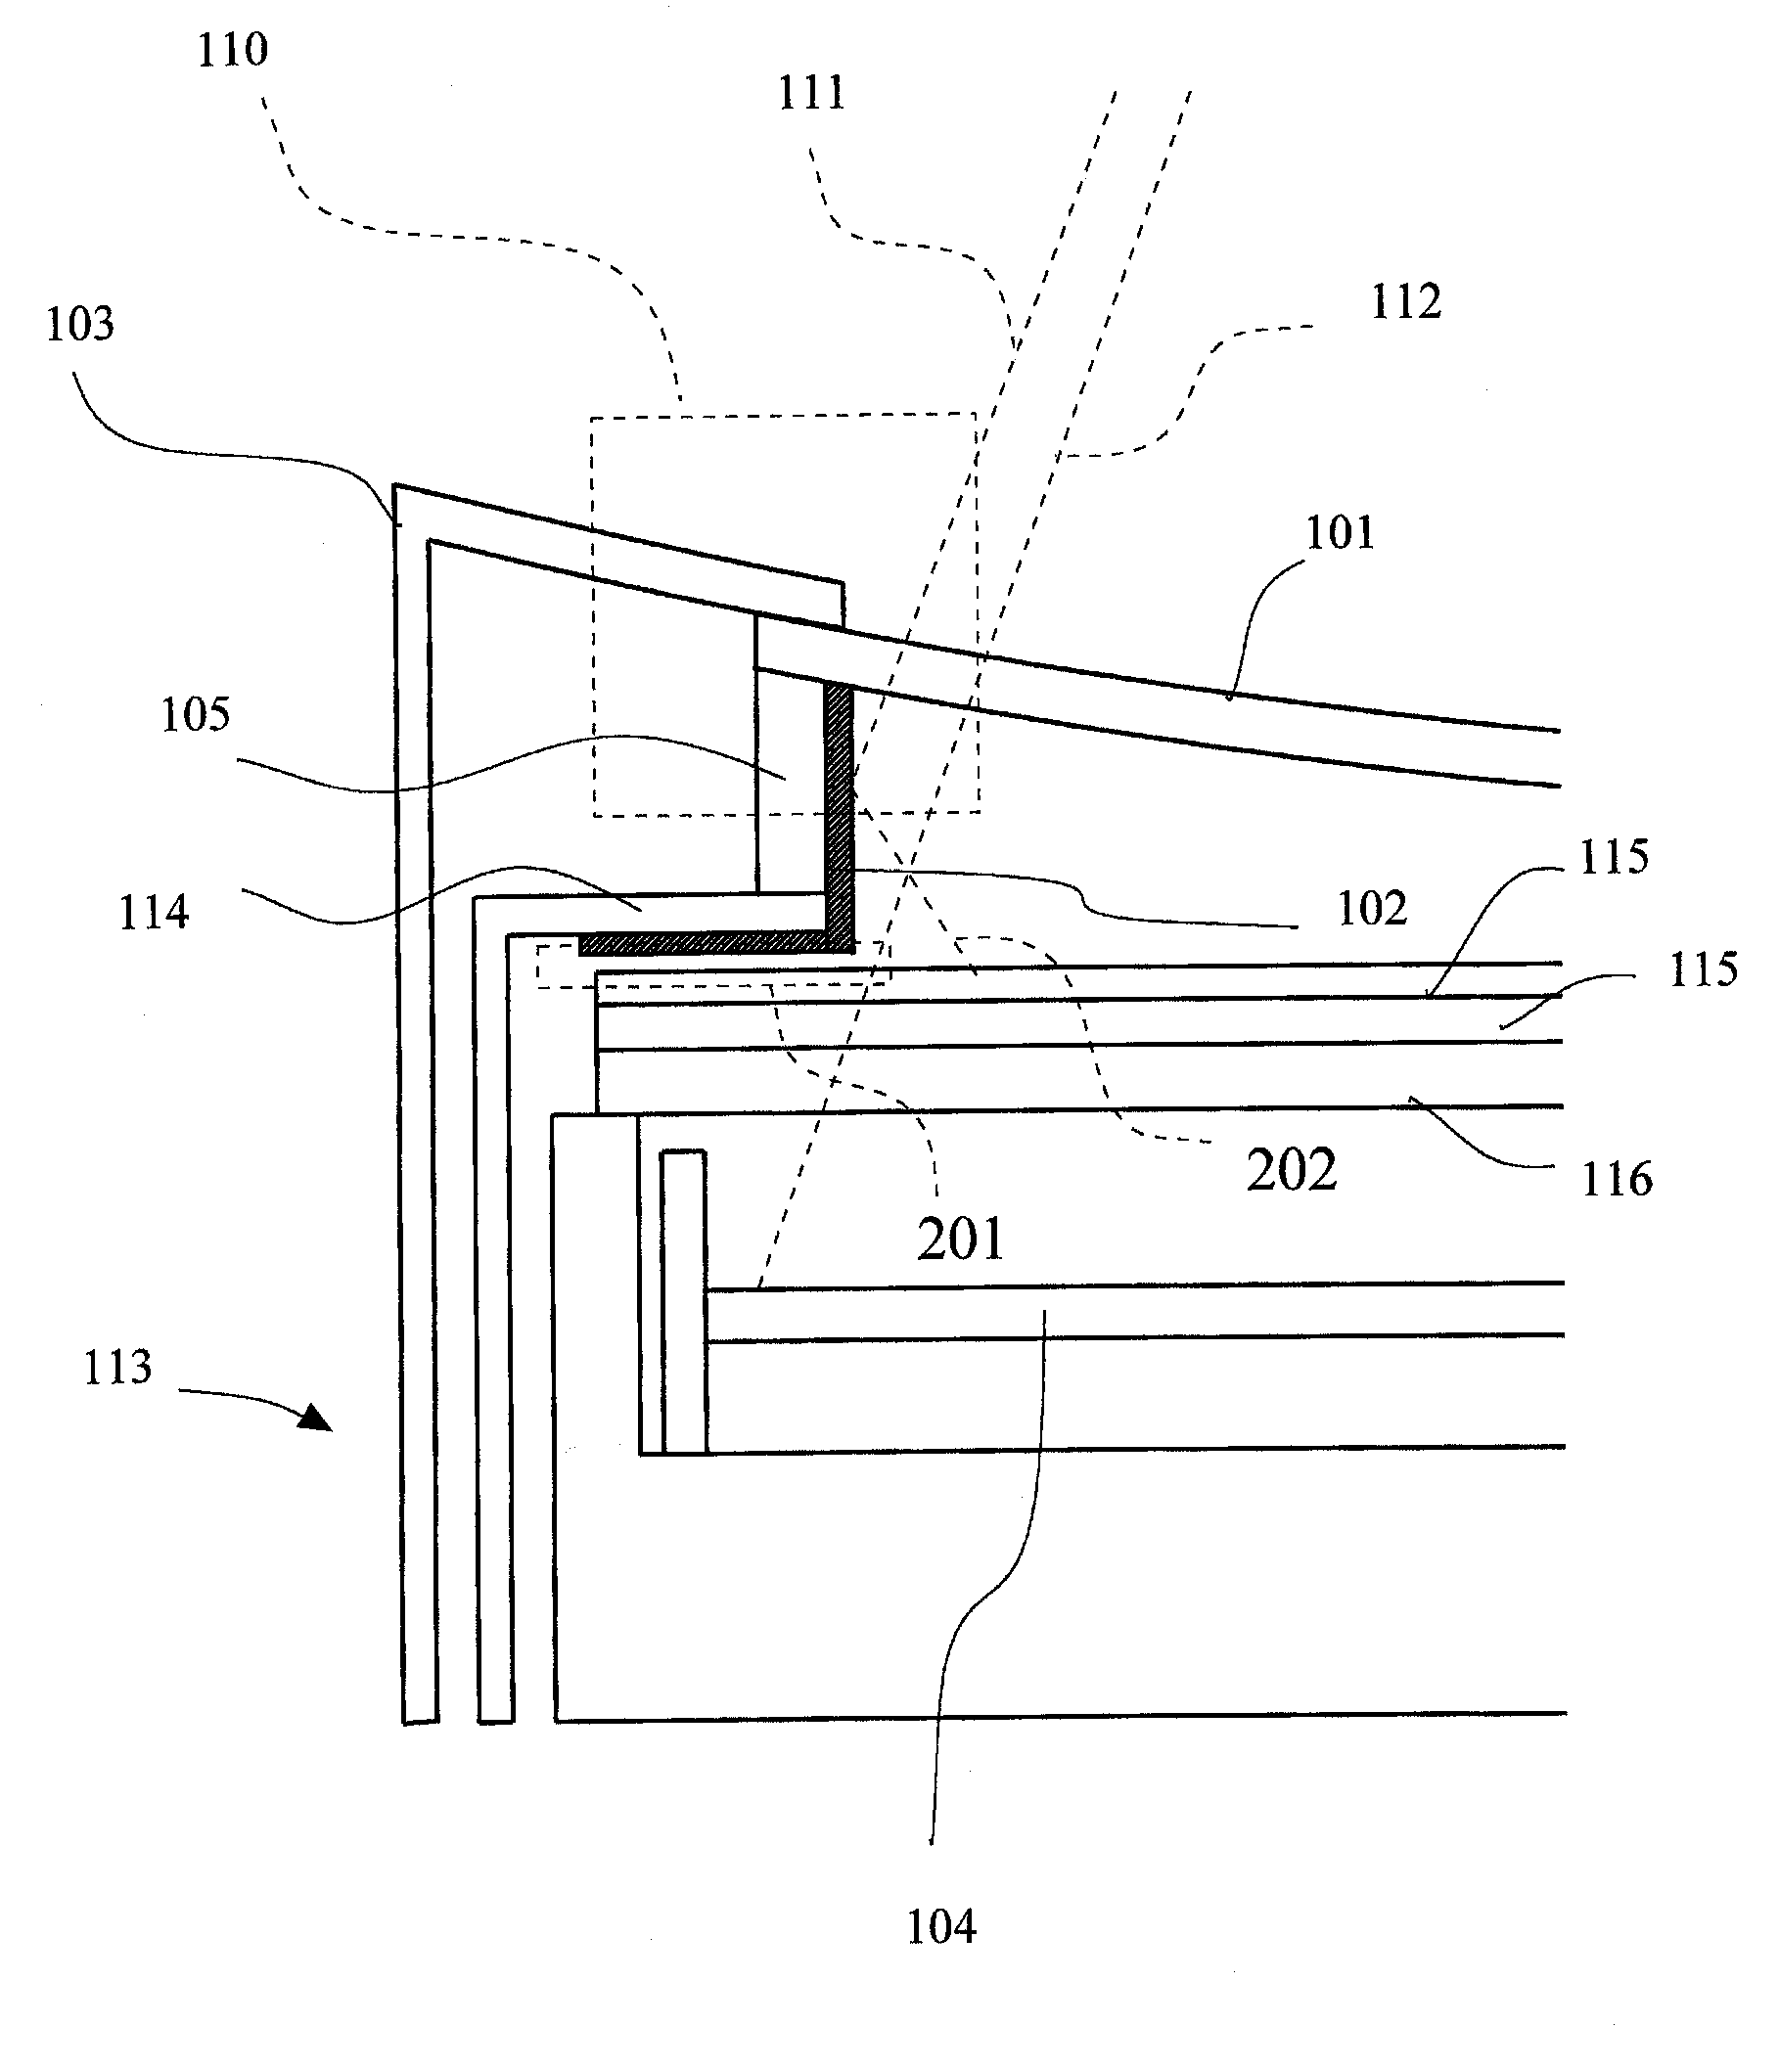 Curved liquid-crystal display device, and method for the forming and installation of reflective plate/sheet for curved liquid-crystal display device